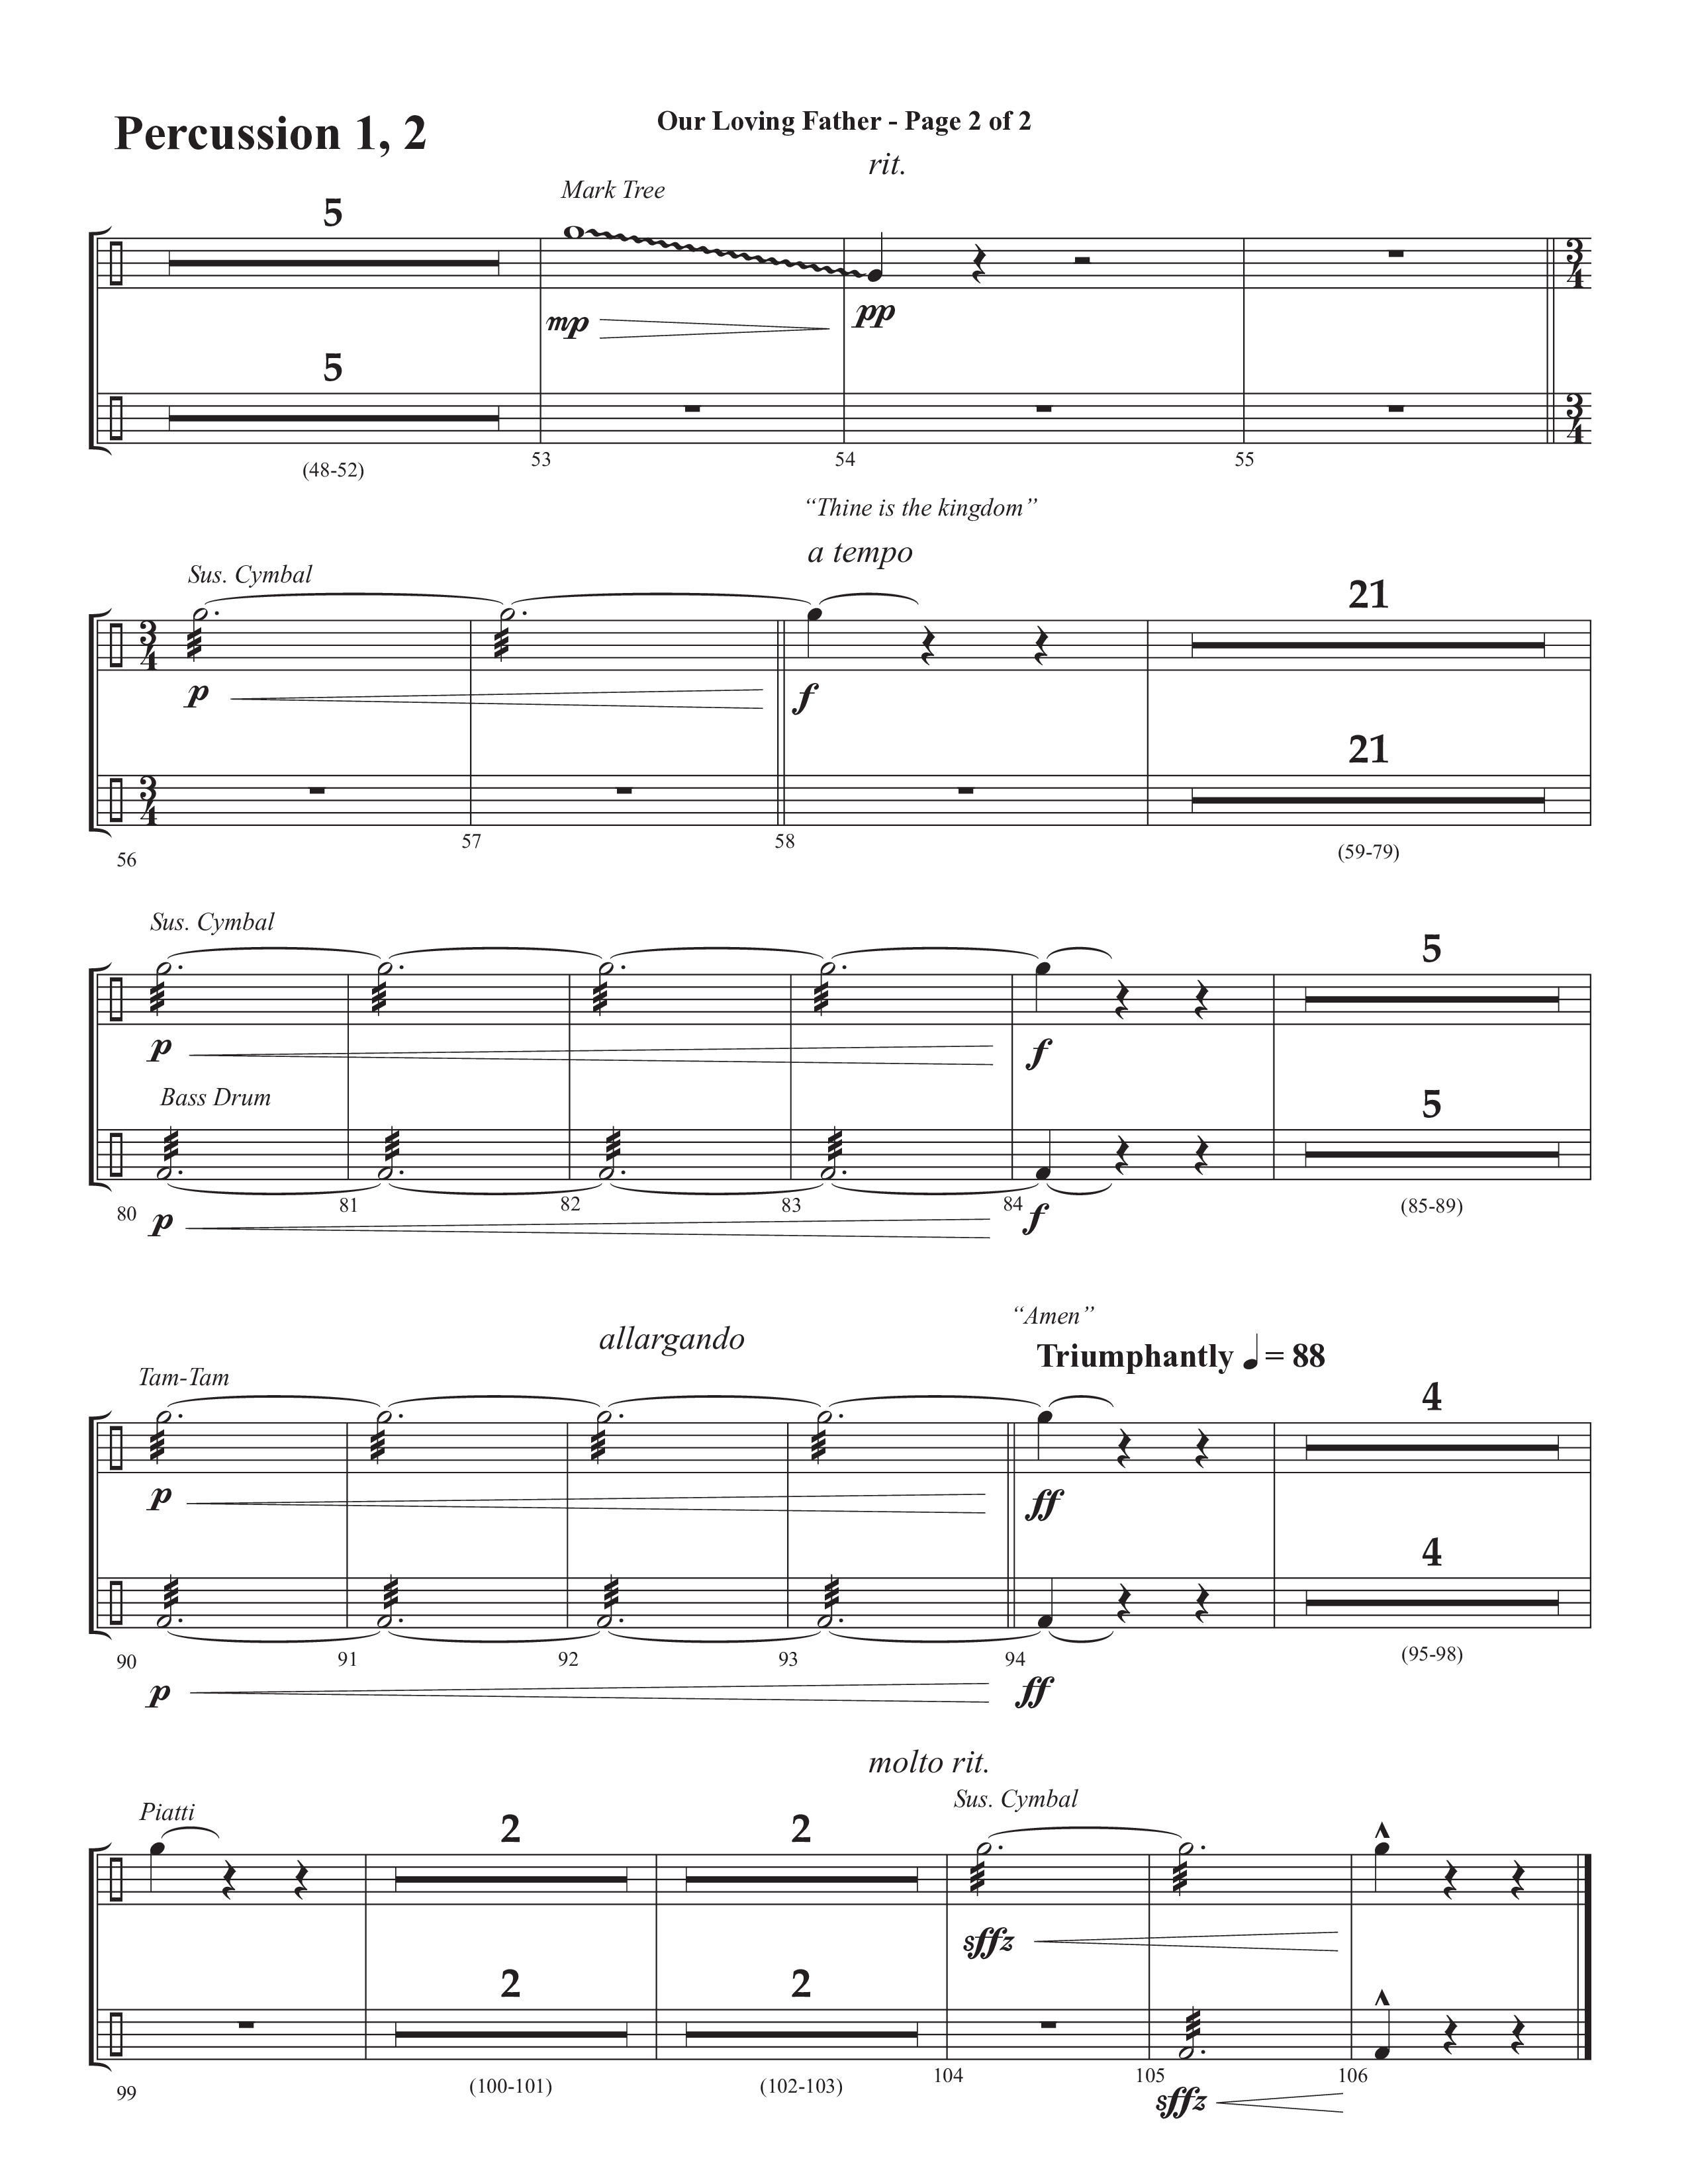 Our Loving Father (Choral Anthem SATB) Percussion 1/2 (Semsen Music / Arr. Phillip Keveren)